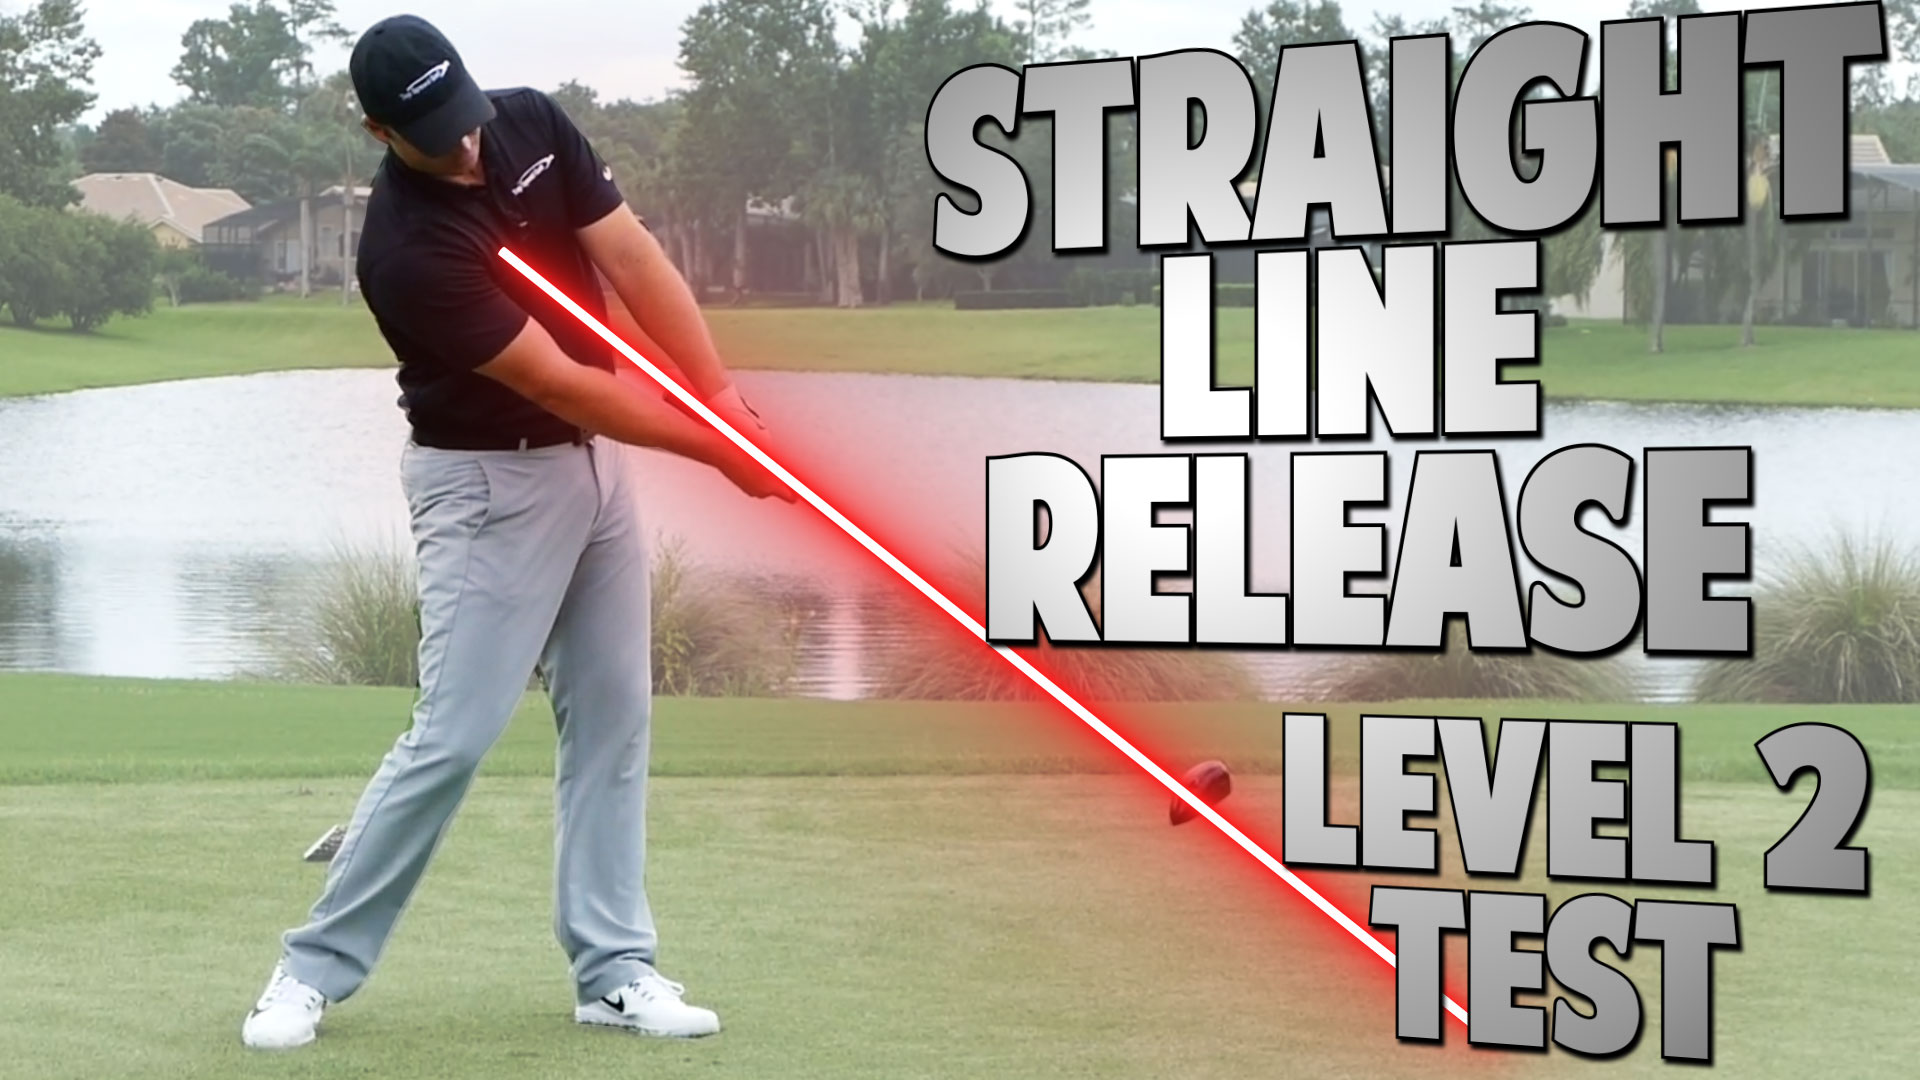 2 5 Level 2 Test Straight Line Release Top Speed Golf